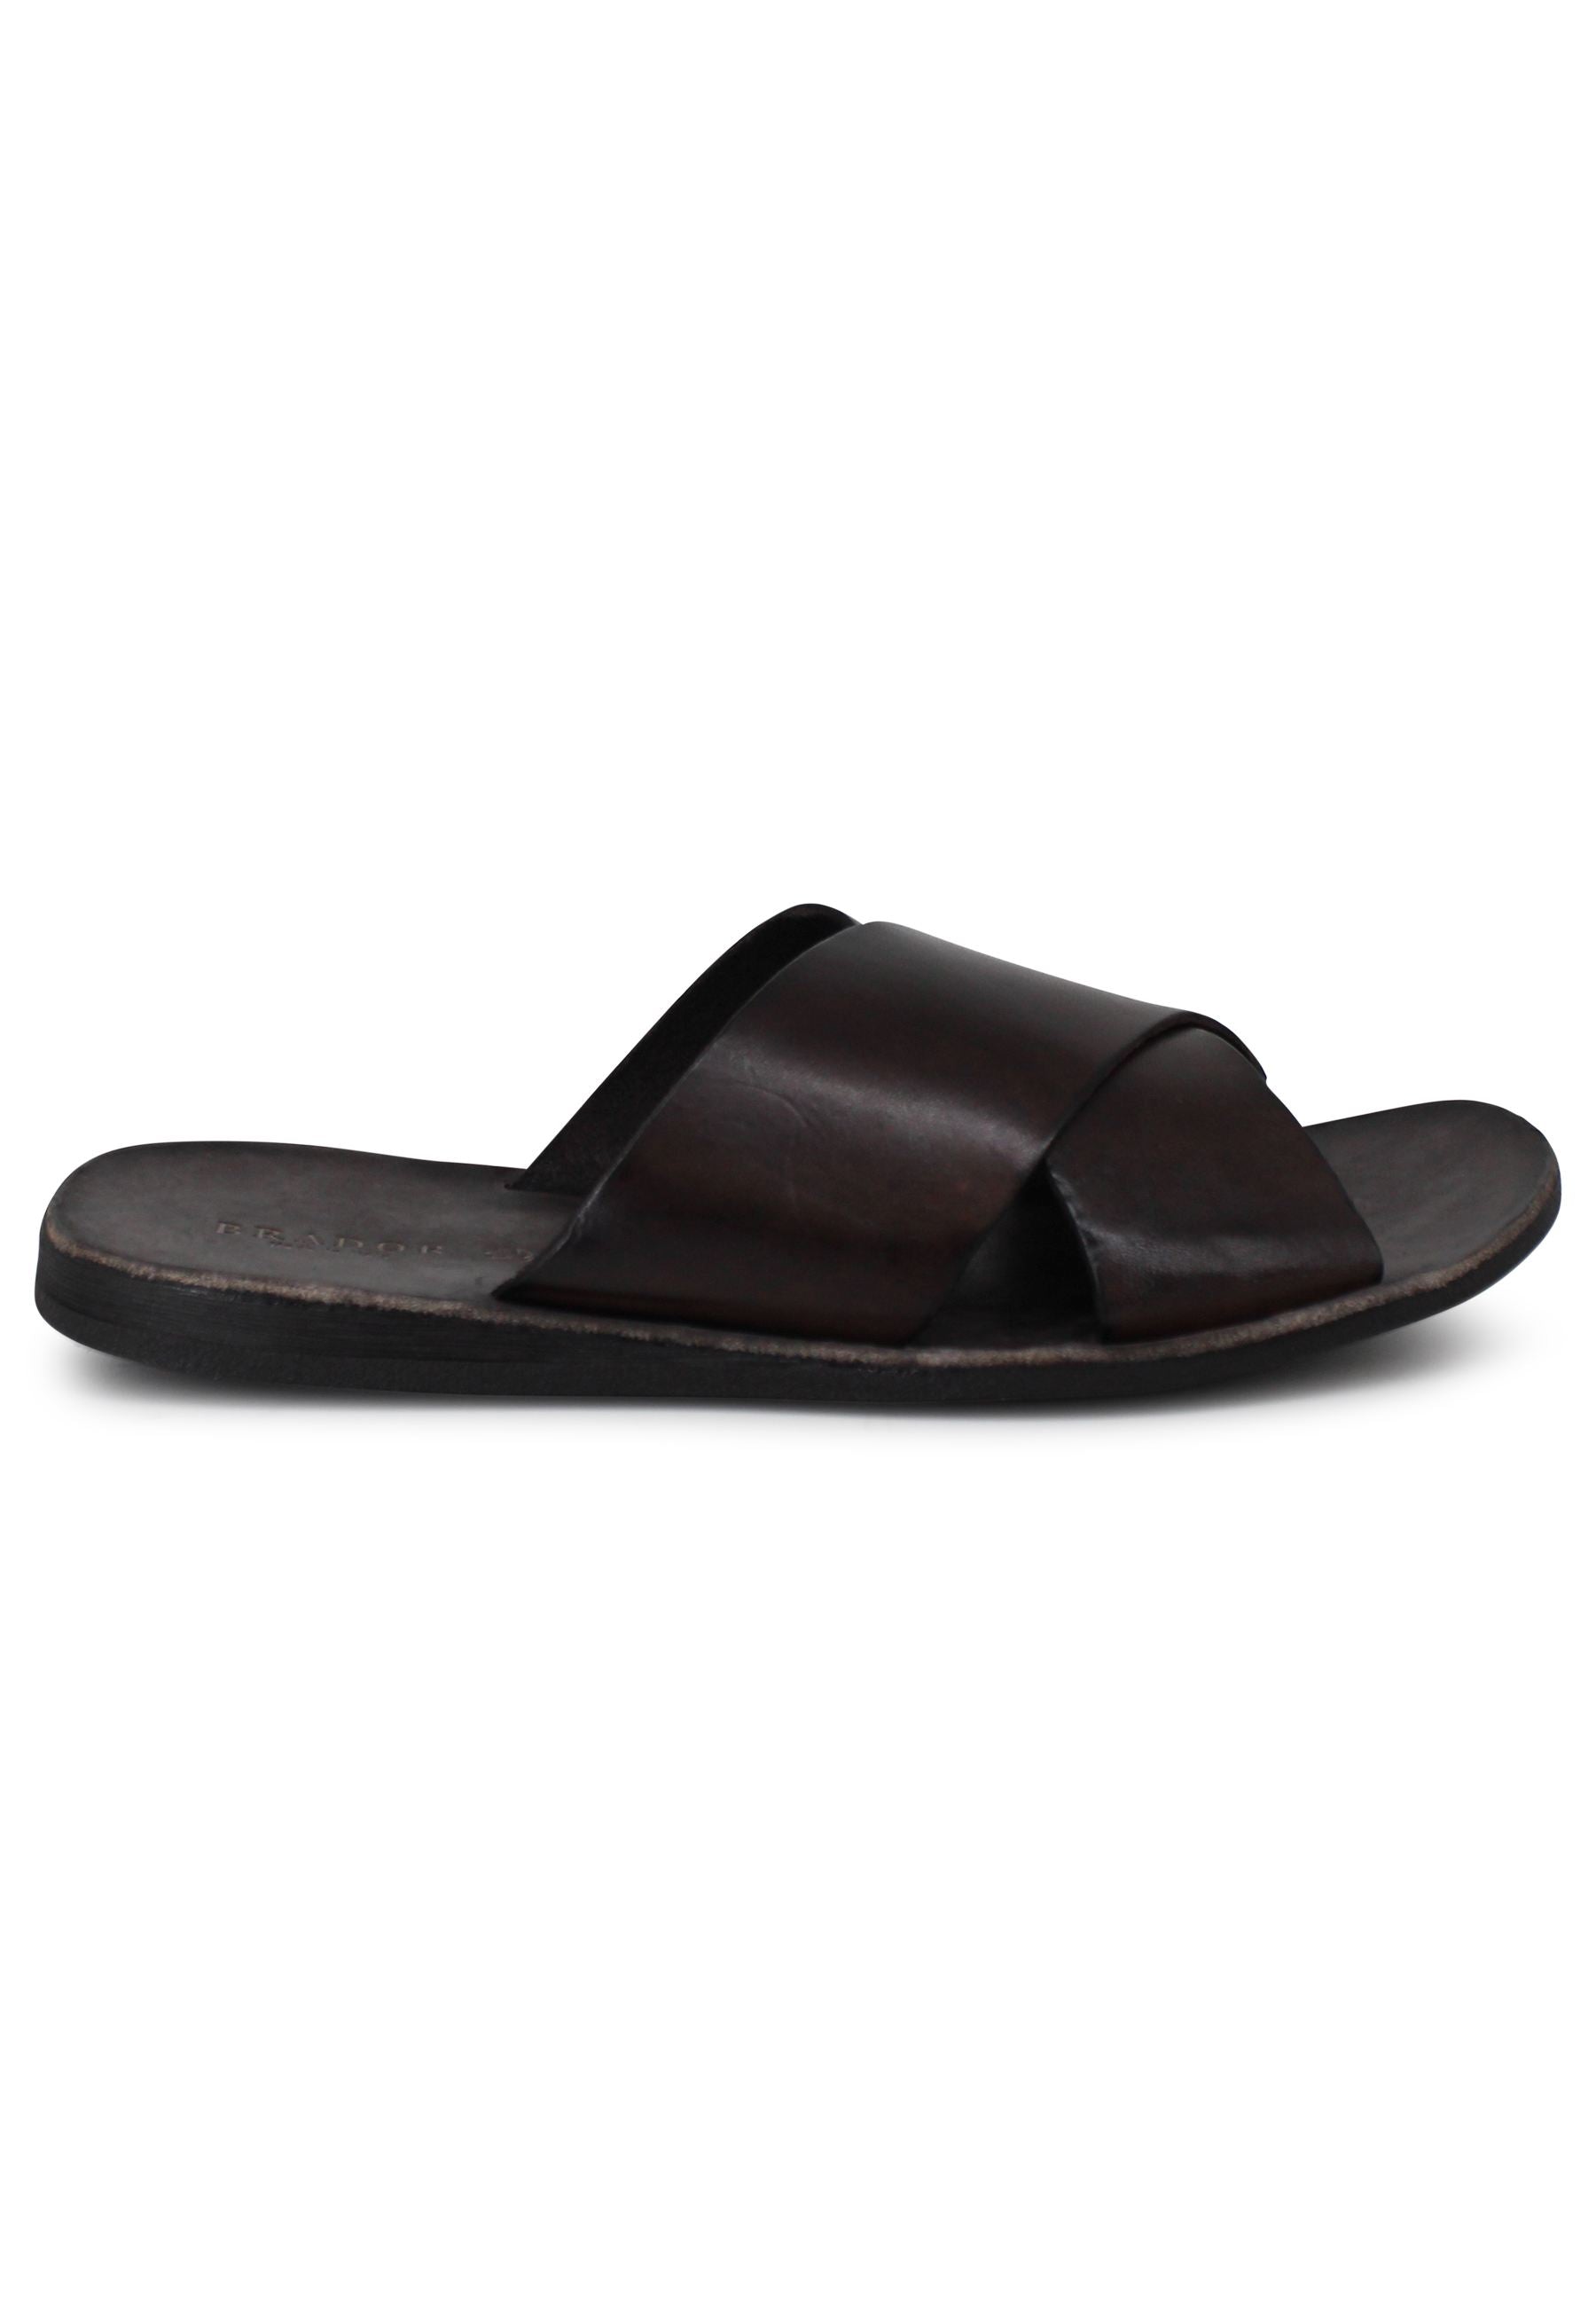 Men's brown leather sandals with double cross